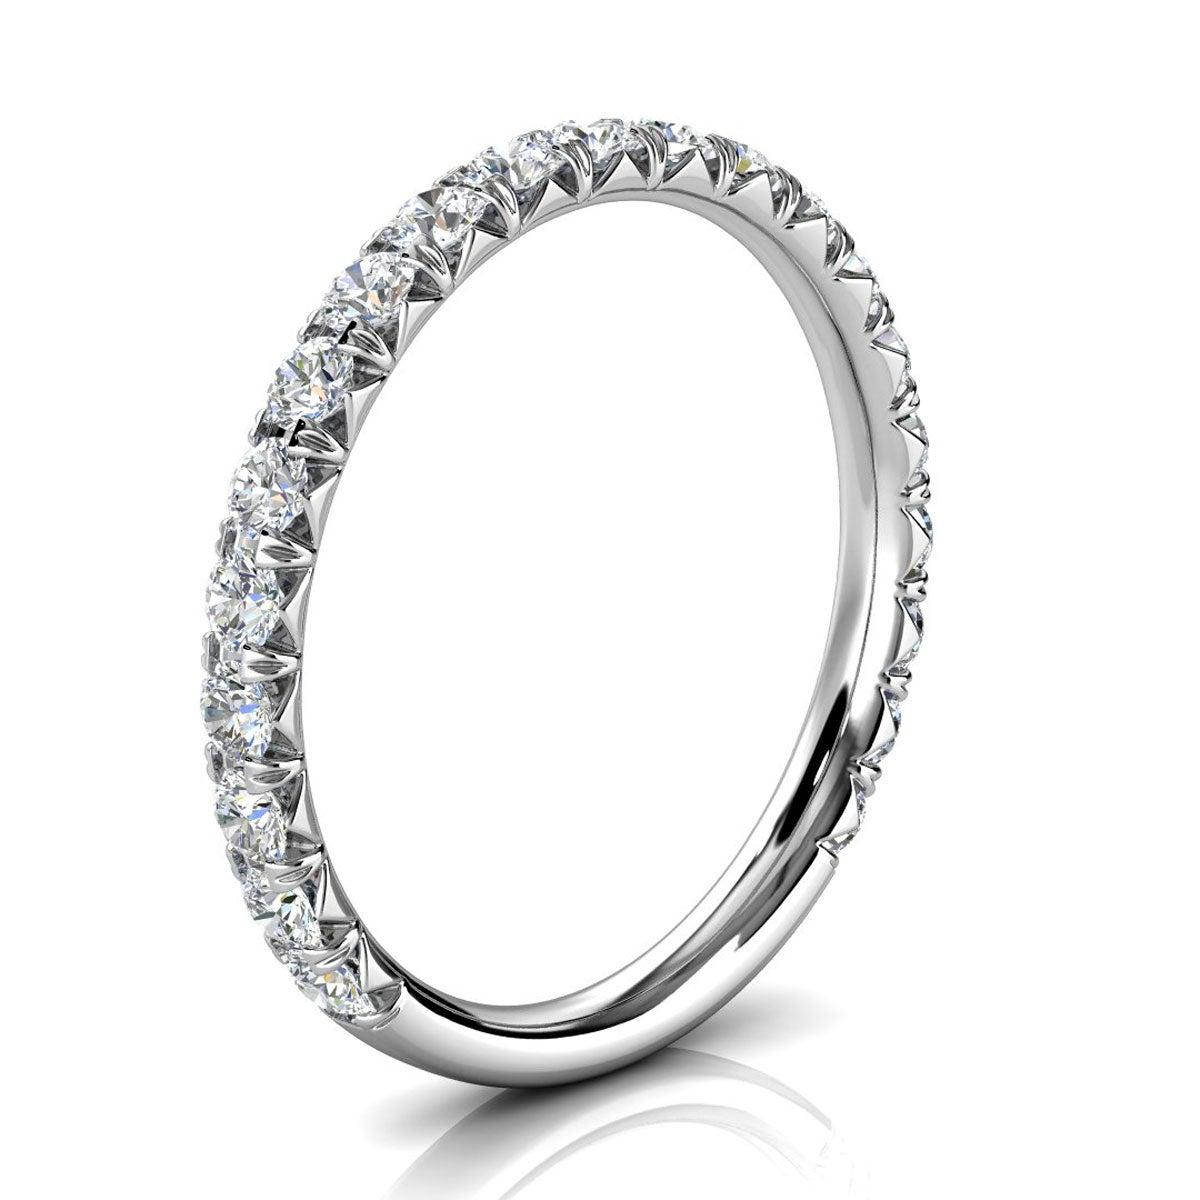 For Sale:  14k White Gold GIA French Pave Diamond Ring '1/2 Ct. Tw' 2